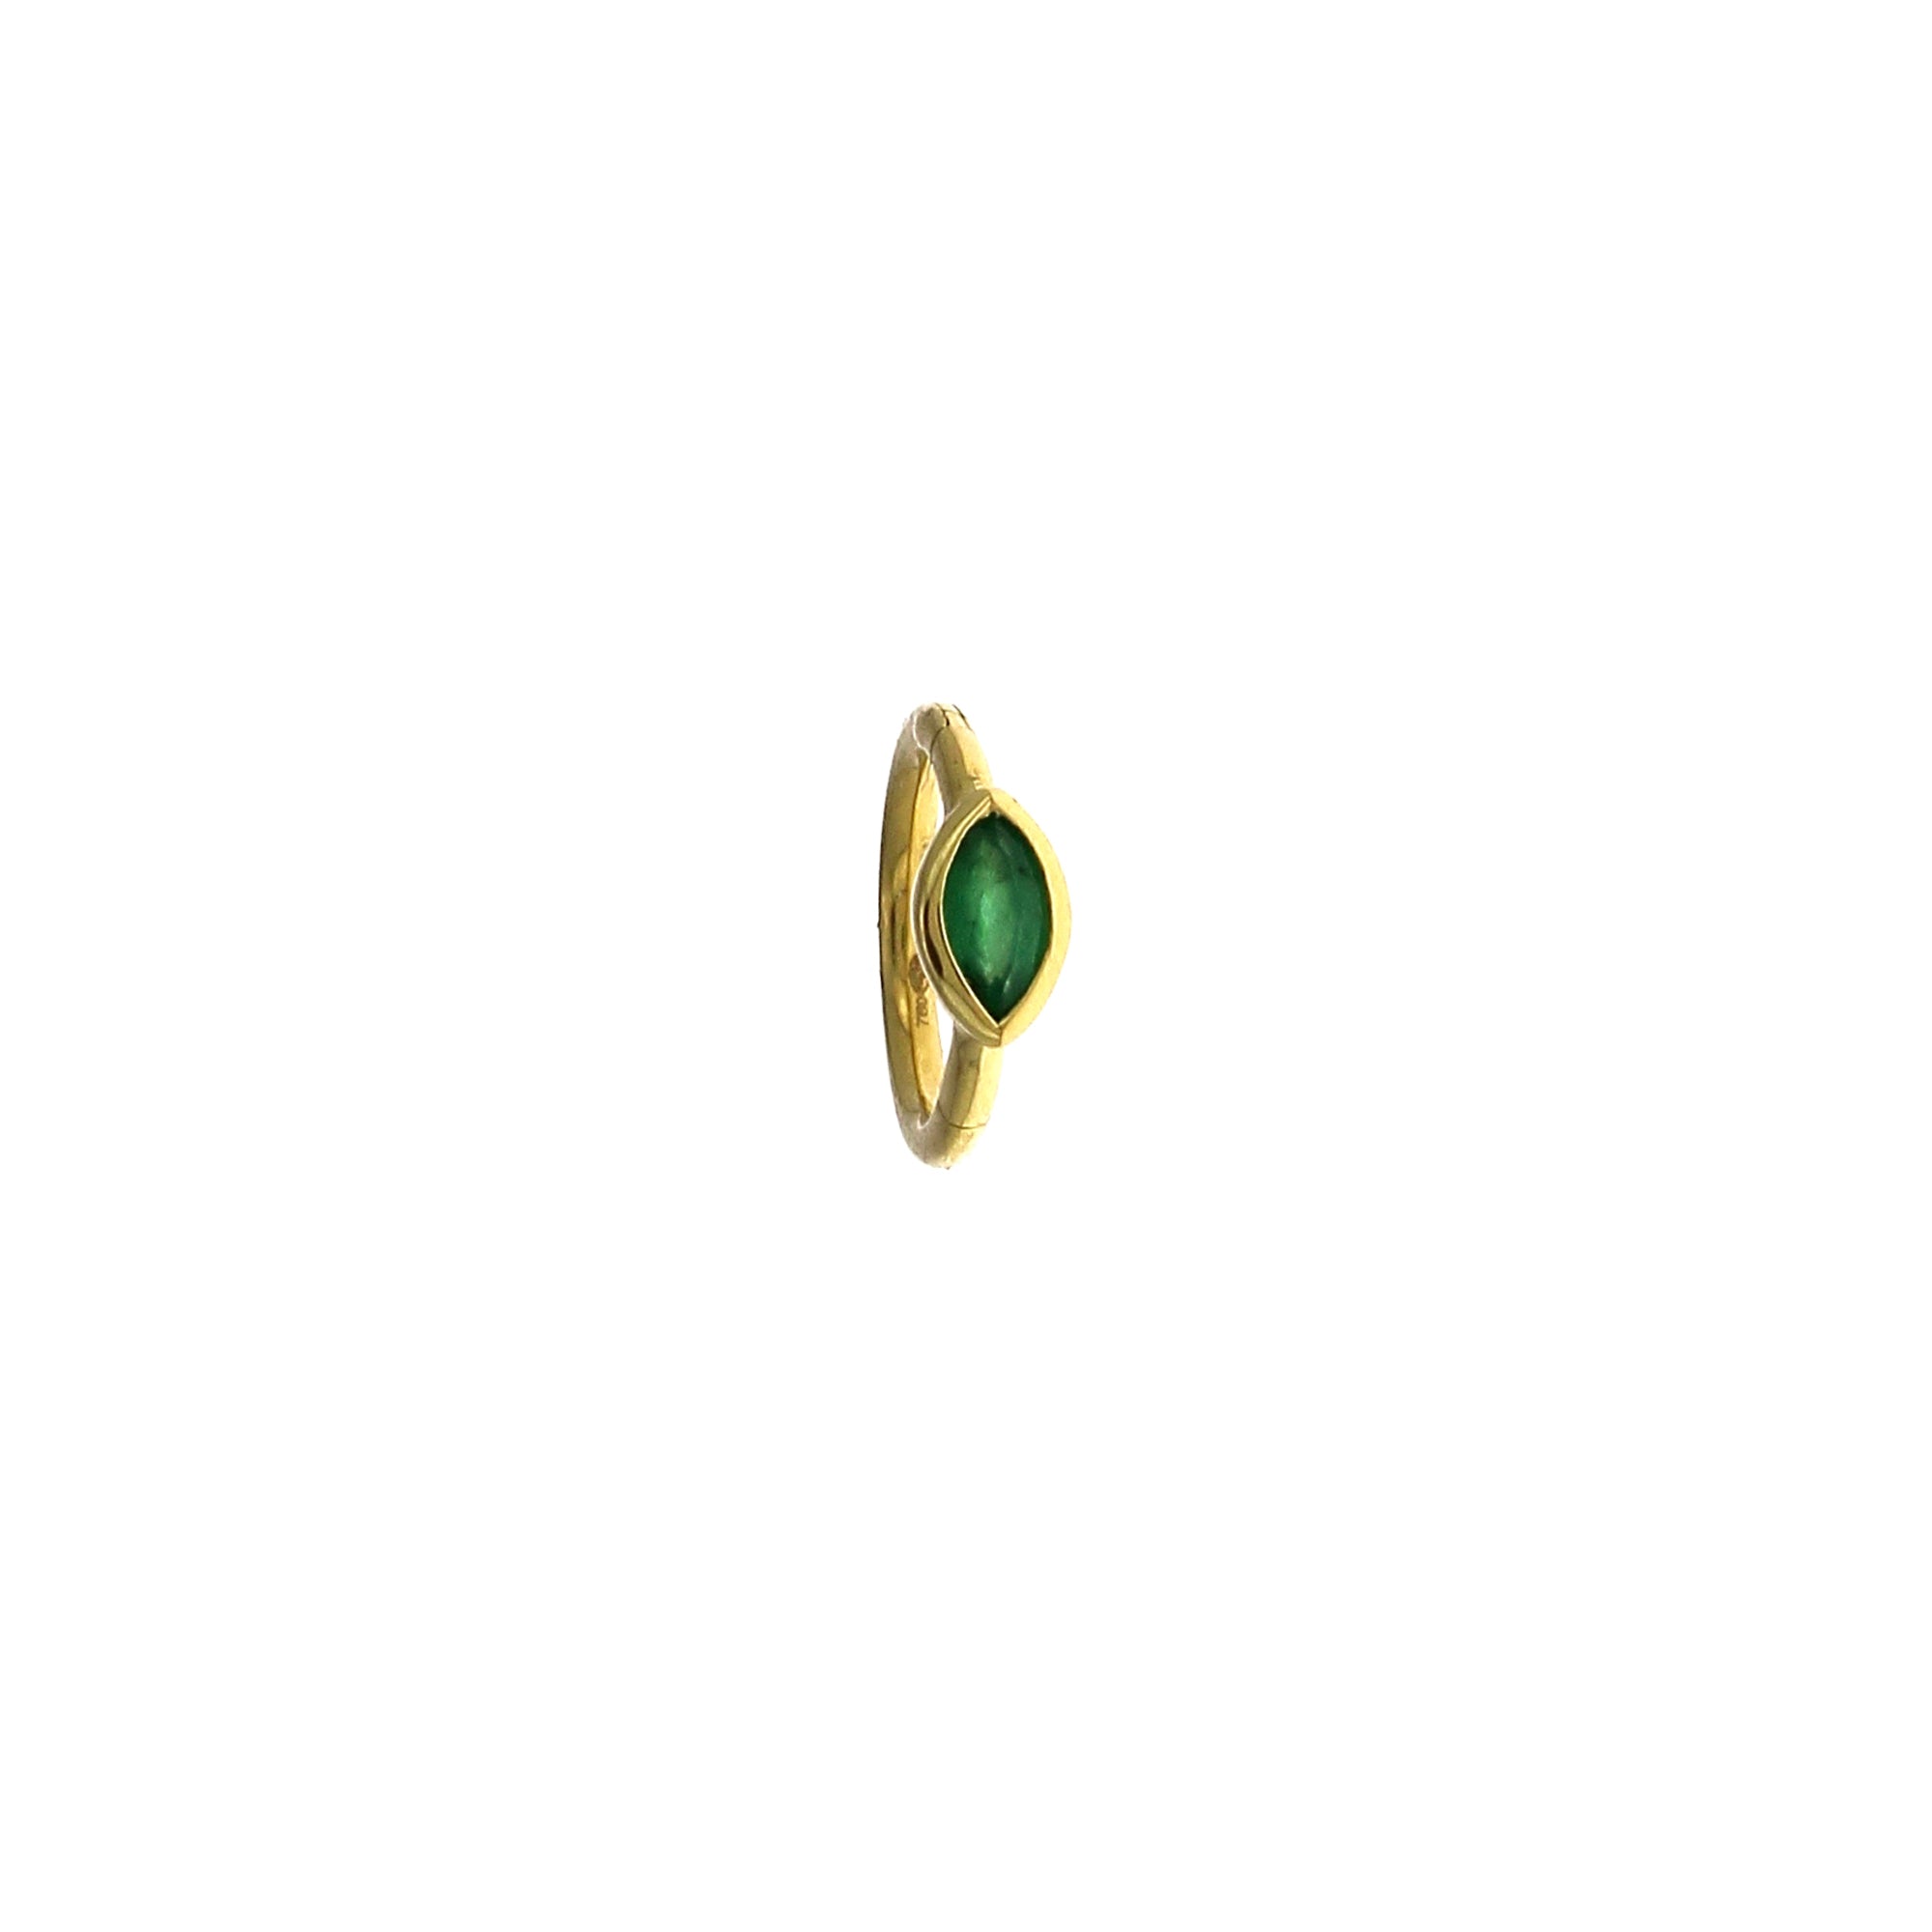 6.5mm Marquise Emerald 3x2mm Yellow Gold Hoop